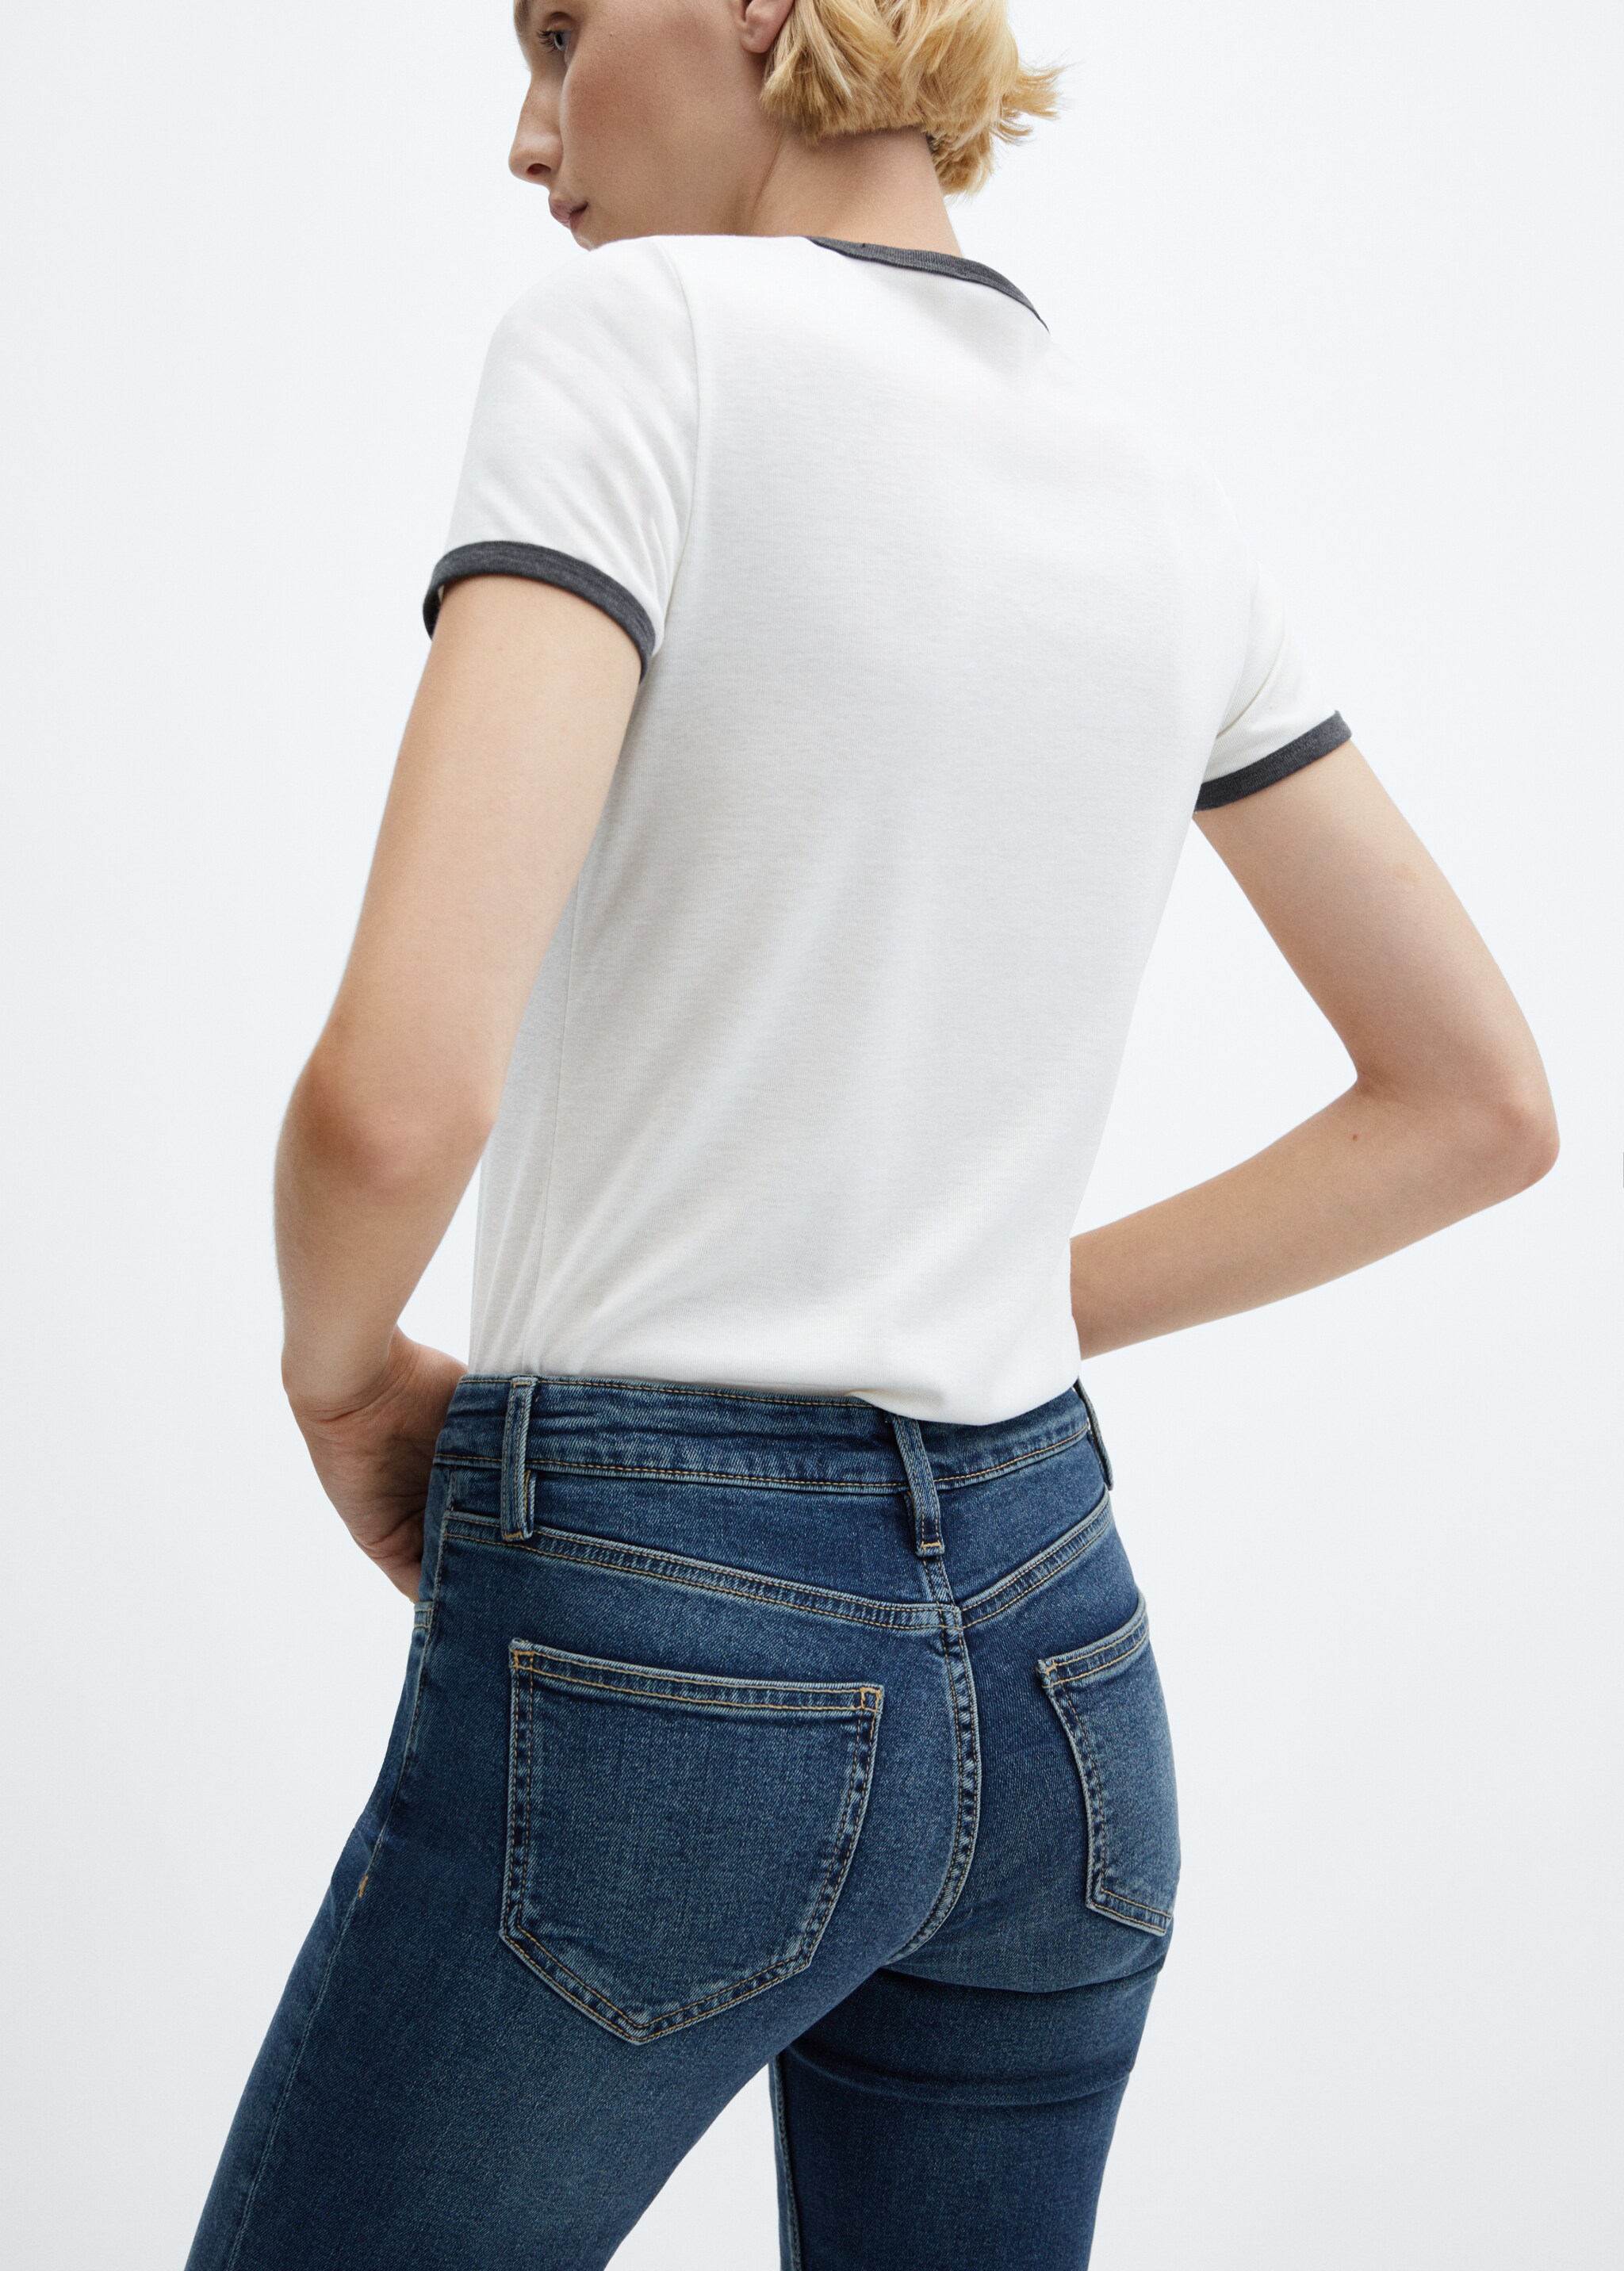 Jeans flare taille basse - Details of the article 6